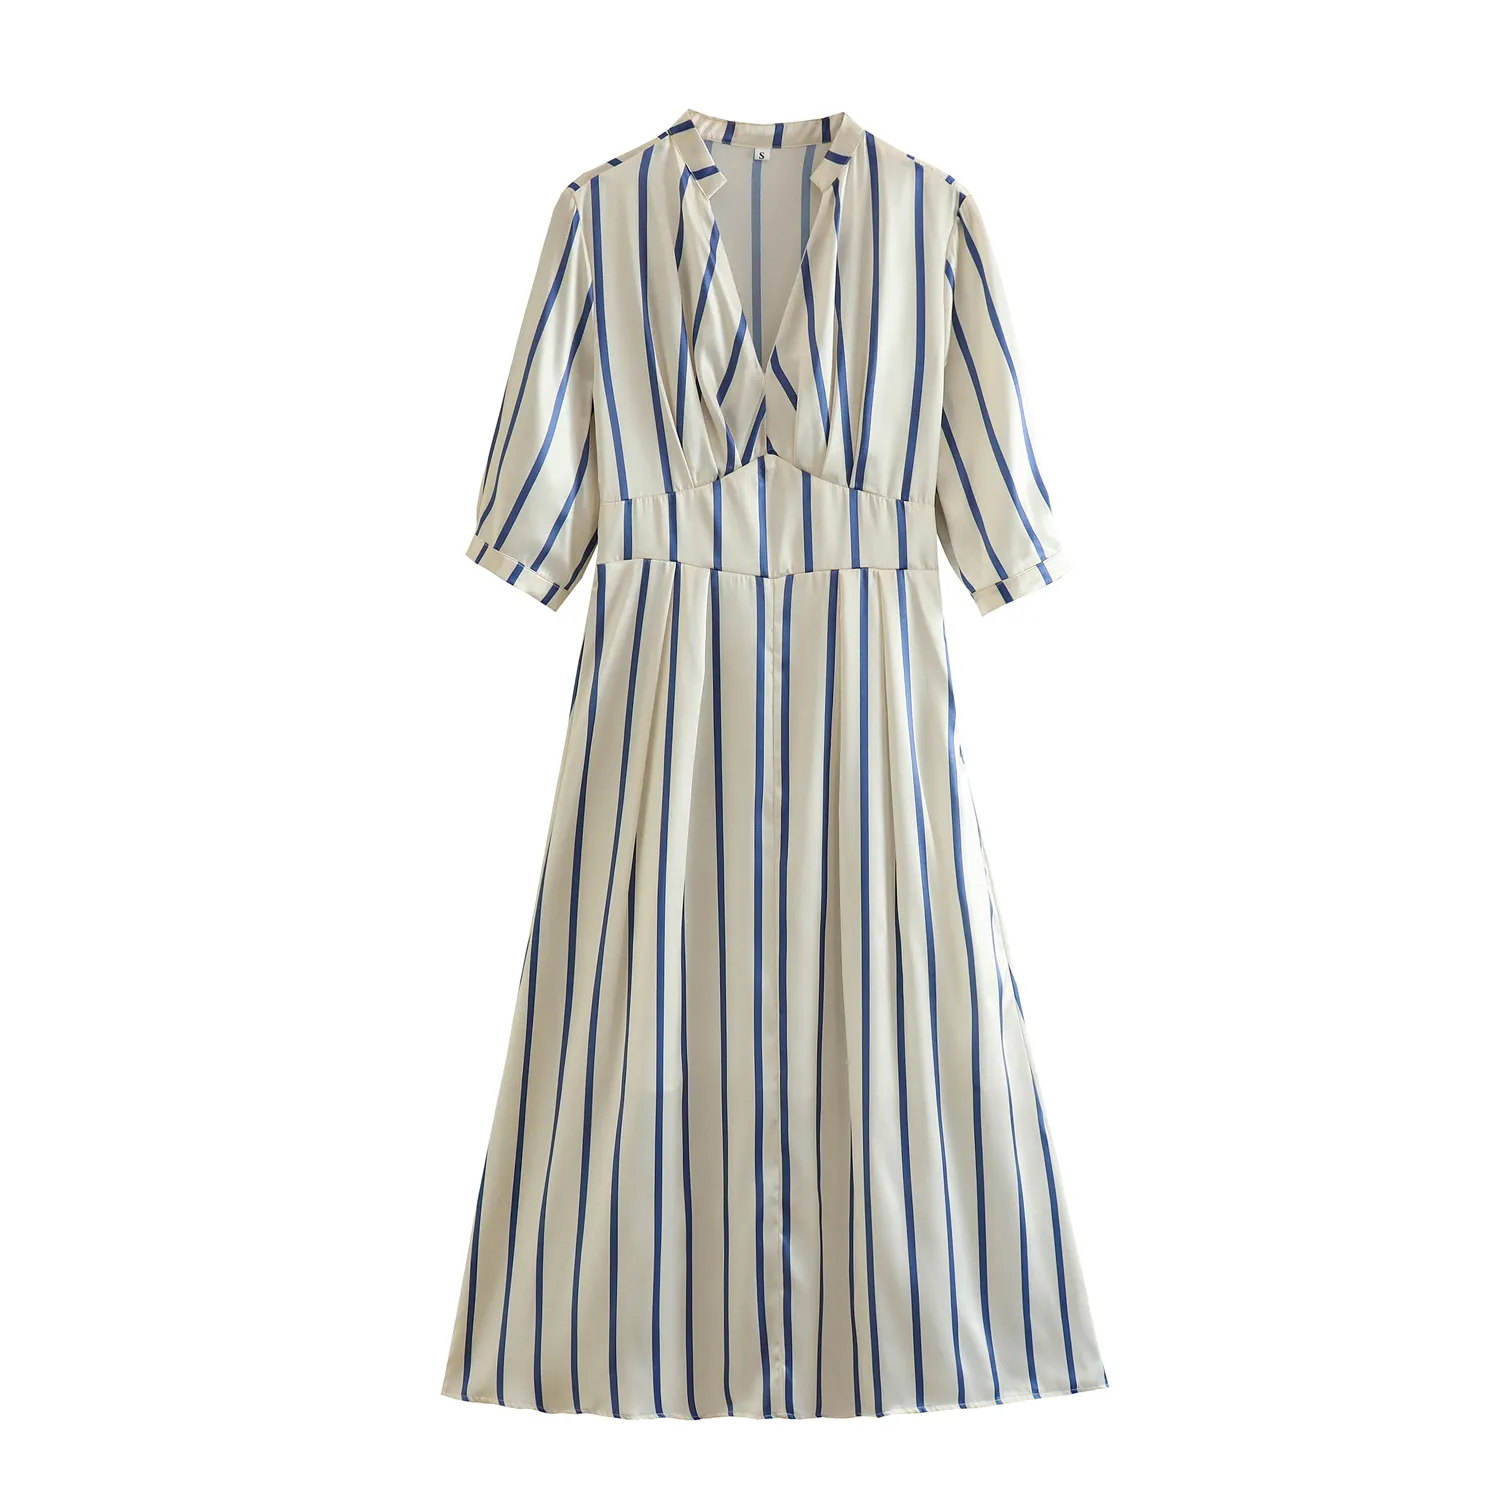 Modest style striped print short sleeve v neck blue and beige color casual women dresses